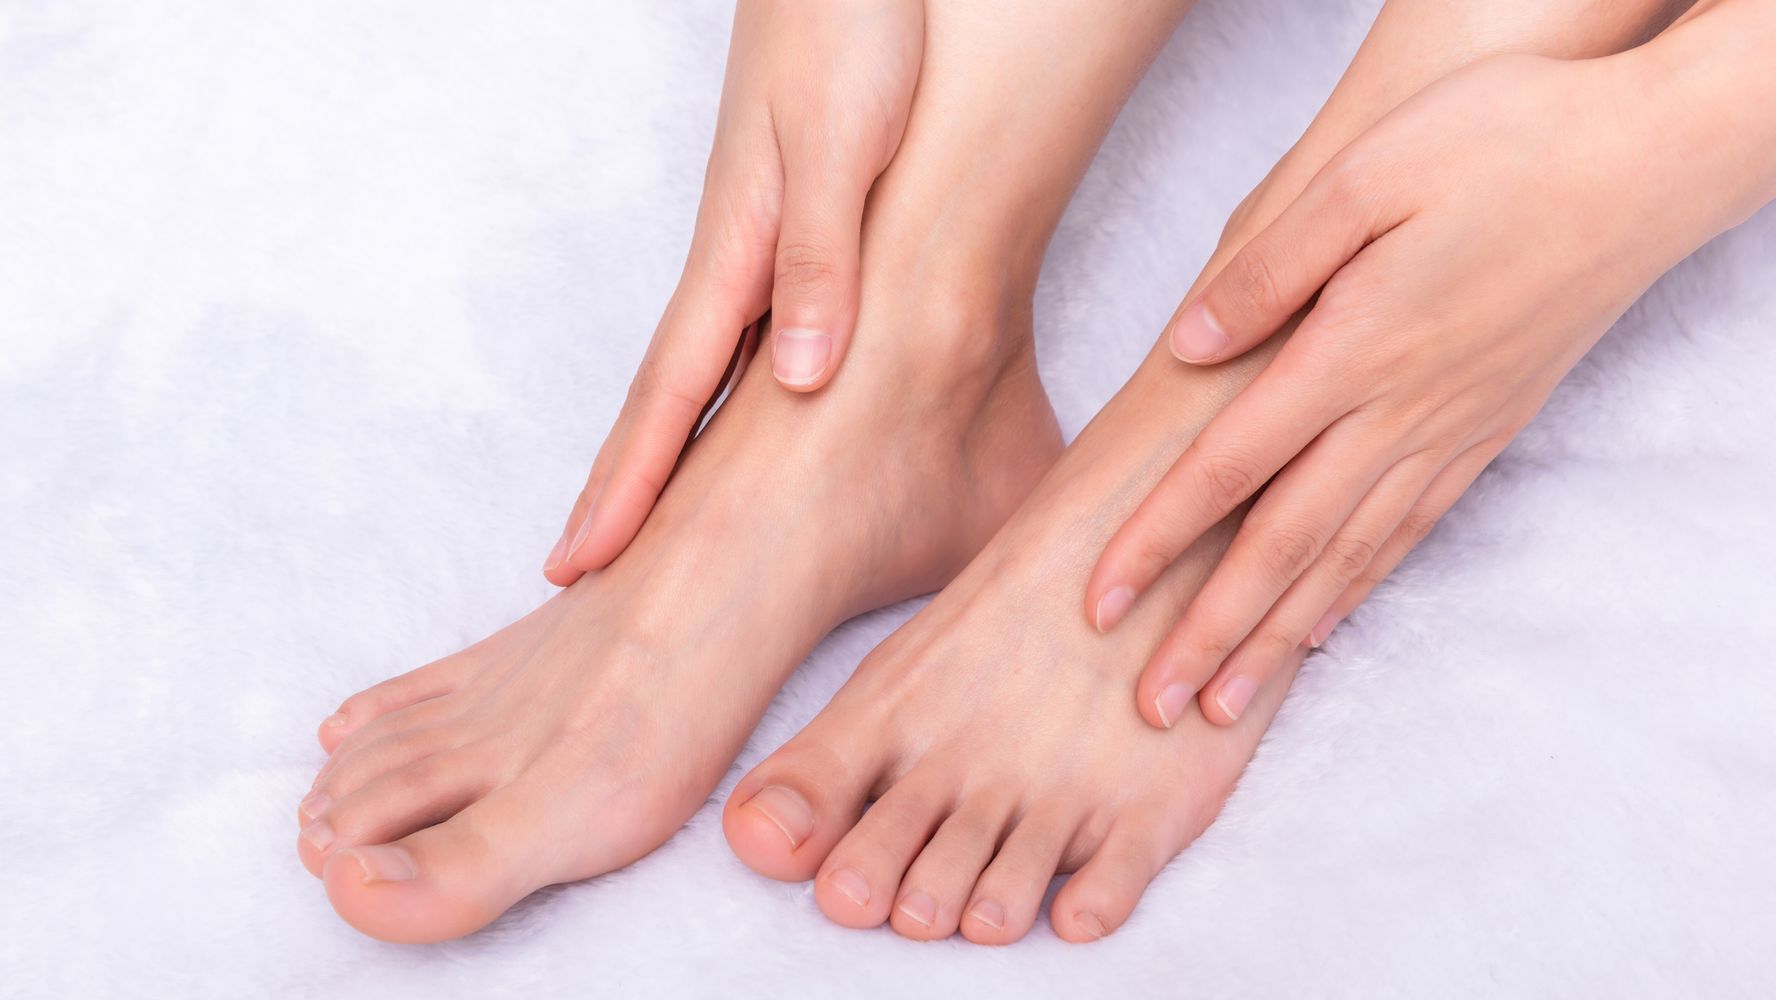 8 Podiatrist-Approved Toe Separators And Spacers